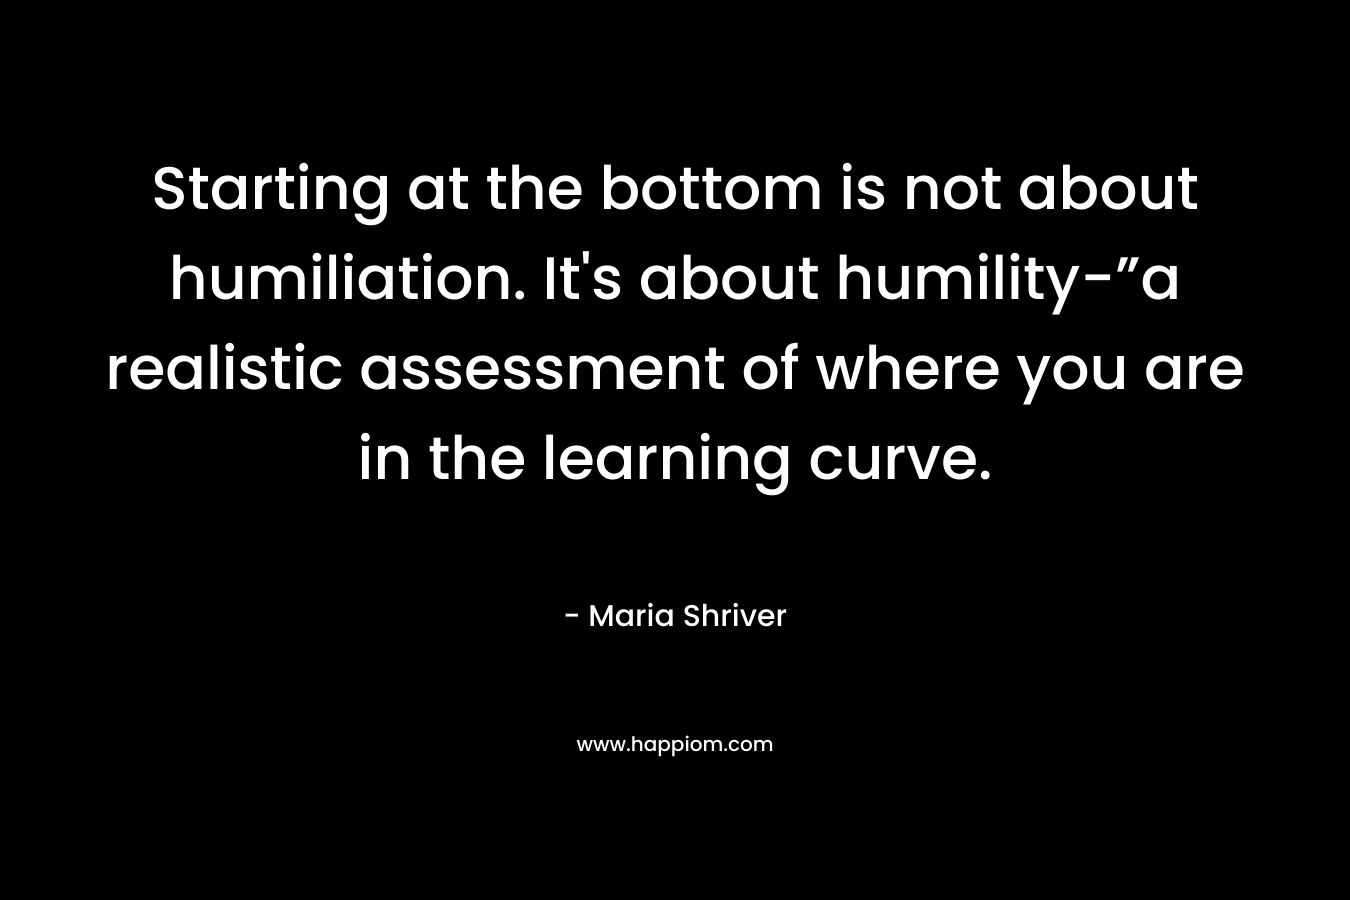 Starting at the bottom is not about humiliation. It’s about humility-”a realistic assessment of where you are in the learning curve. – Maria Shriver